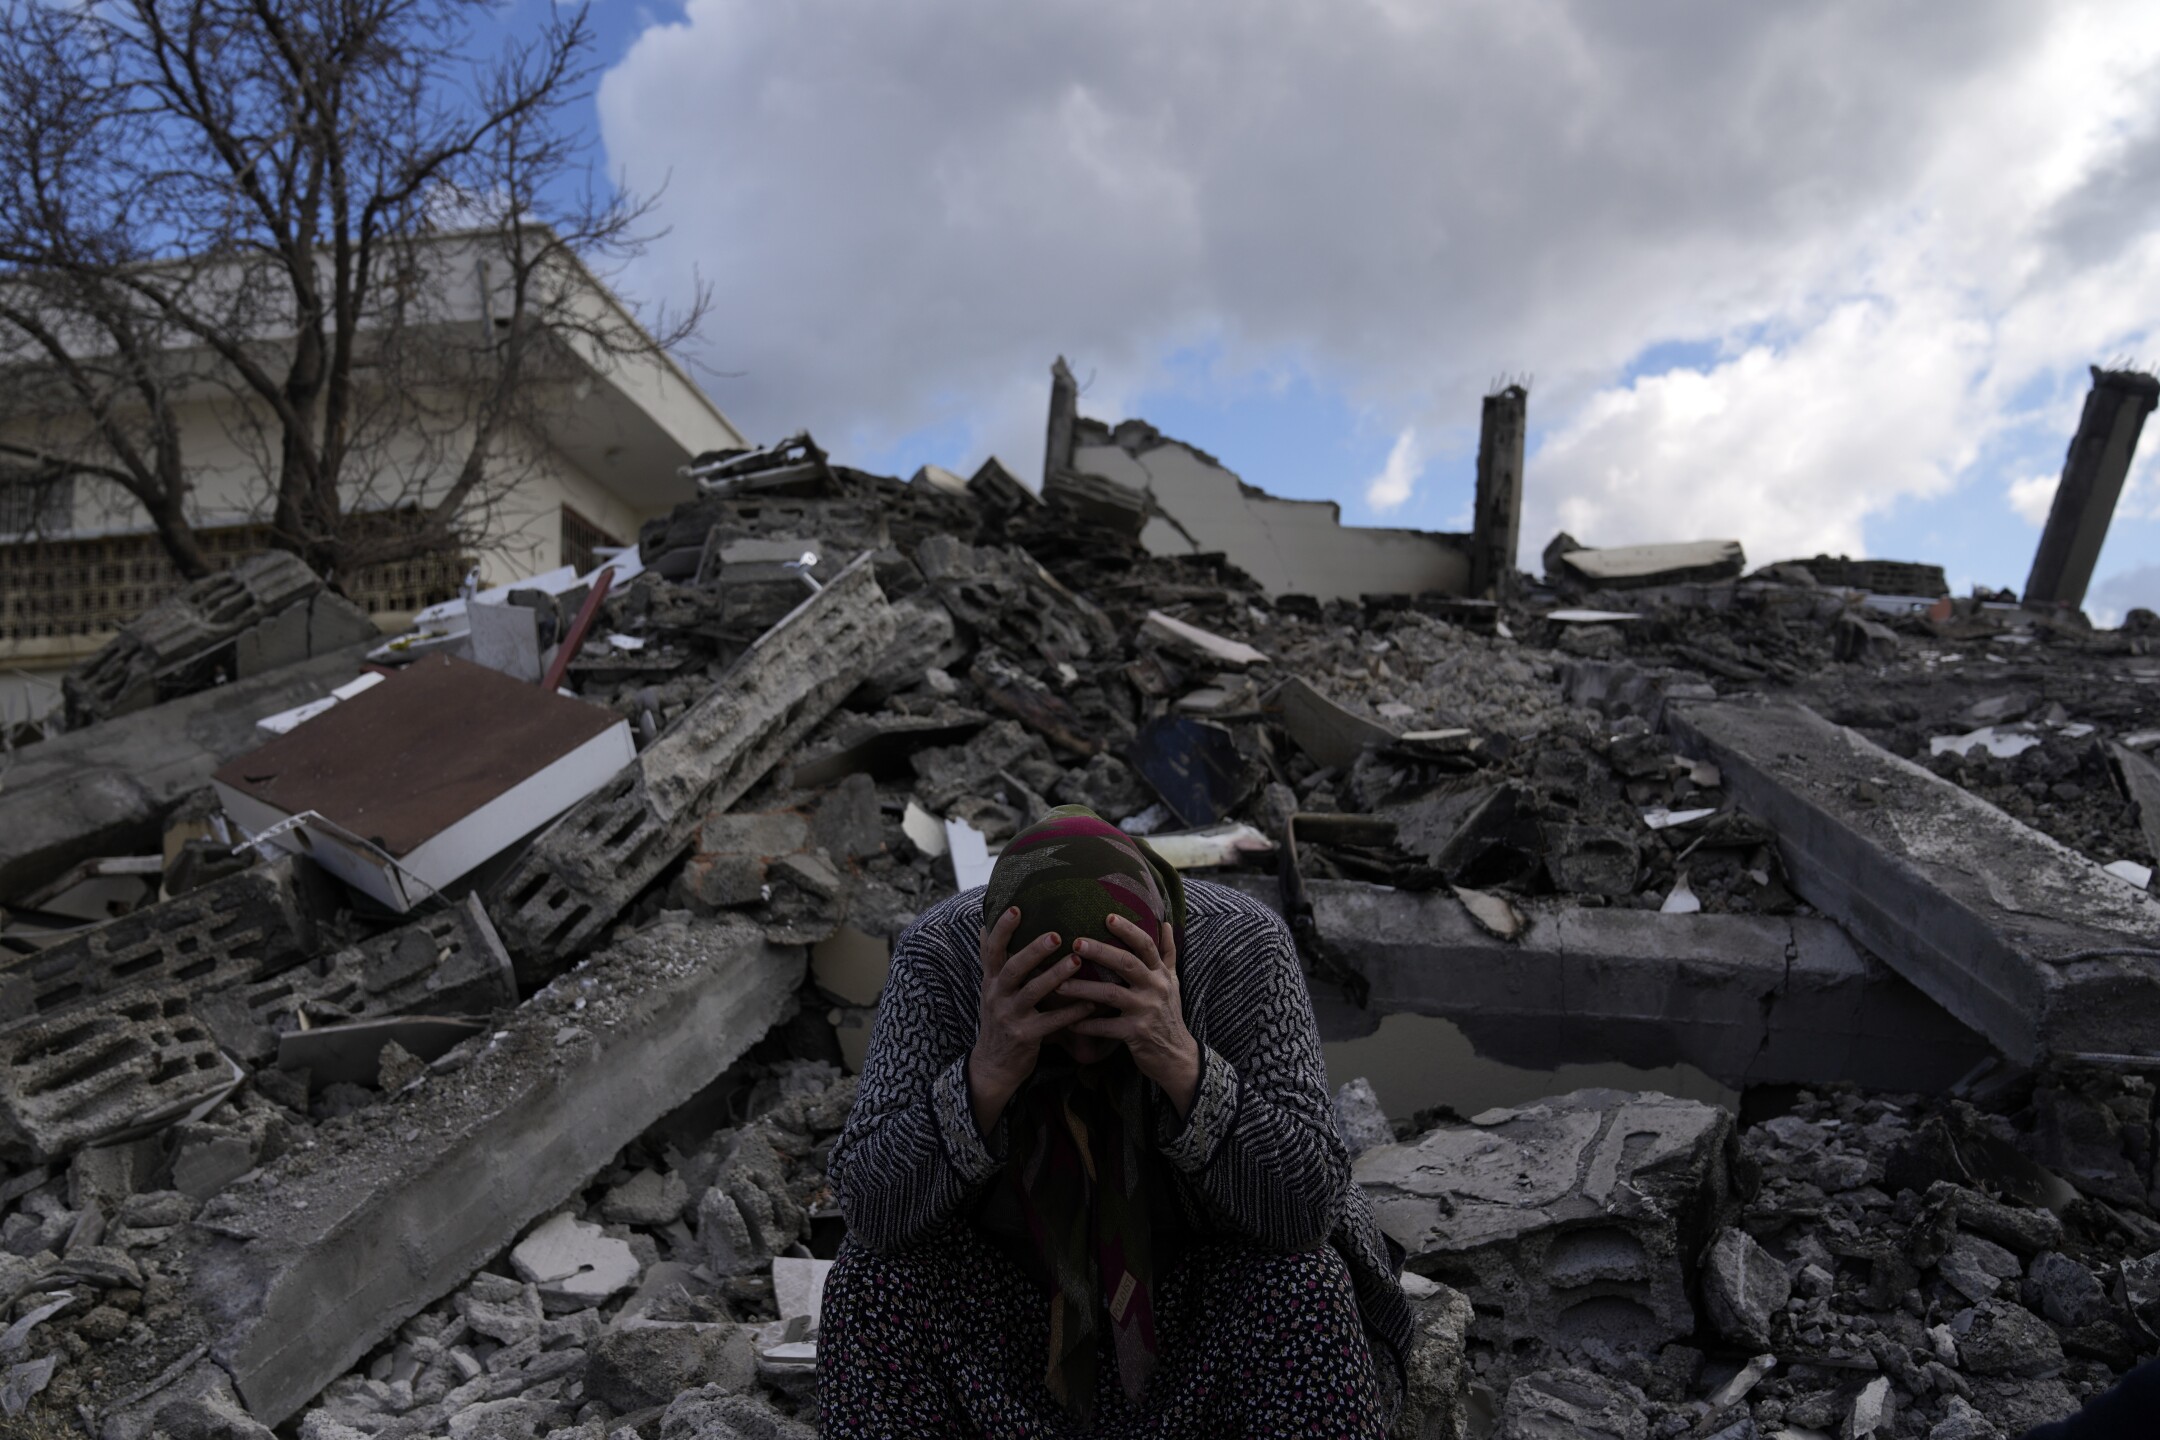 A woman sits on the rubble as emergency rescue teams search for people under the remains of destroyed buildings in Nurdagi town on the outskirts of Osmaniye, Turkey, on Feb. 7, 2023, the day after a powerful earthquake hit southeast Turkey and Syria. (AP Photo/Khalil Hamra)